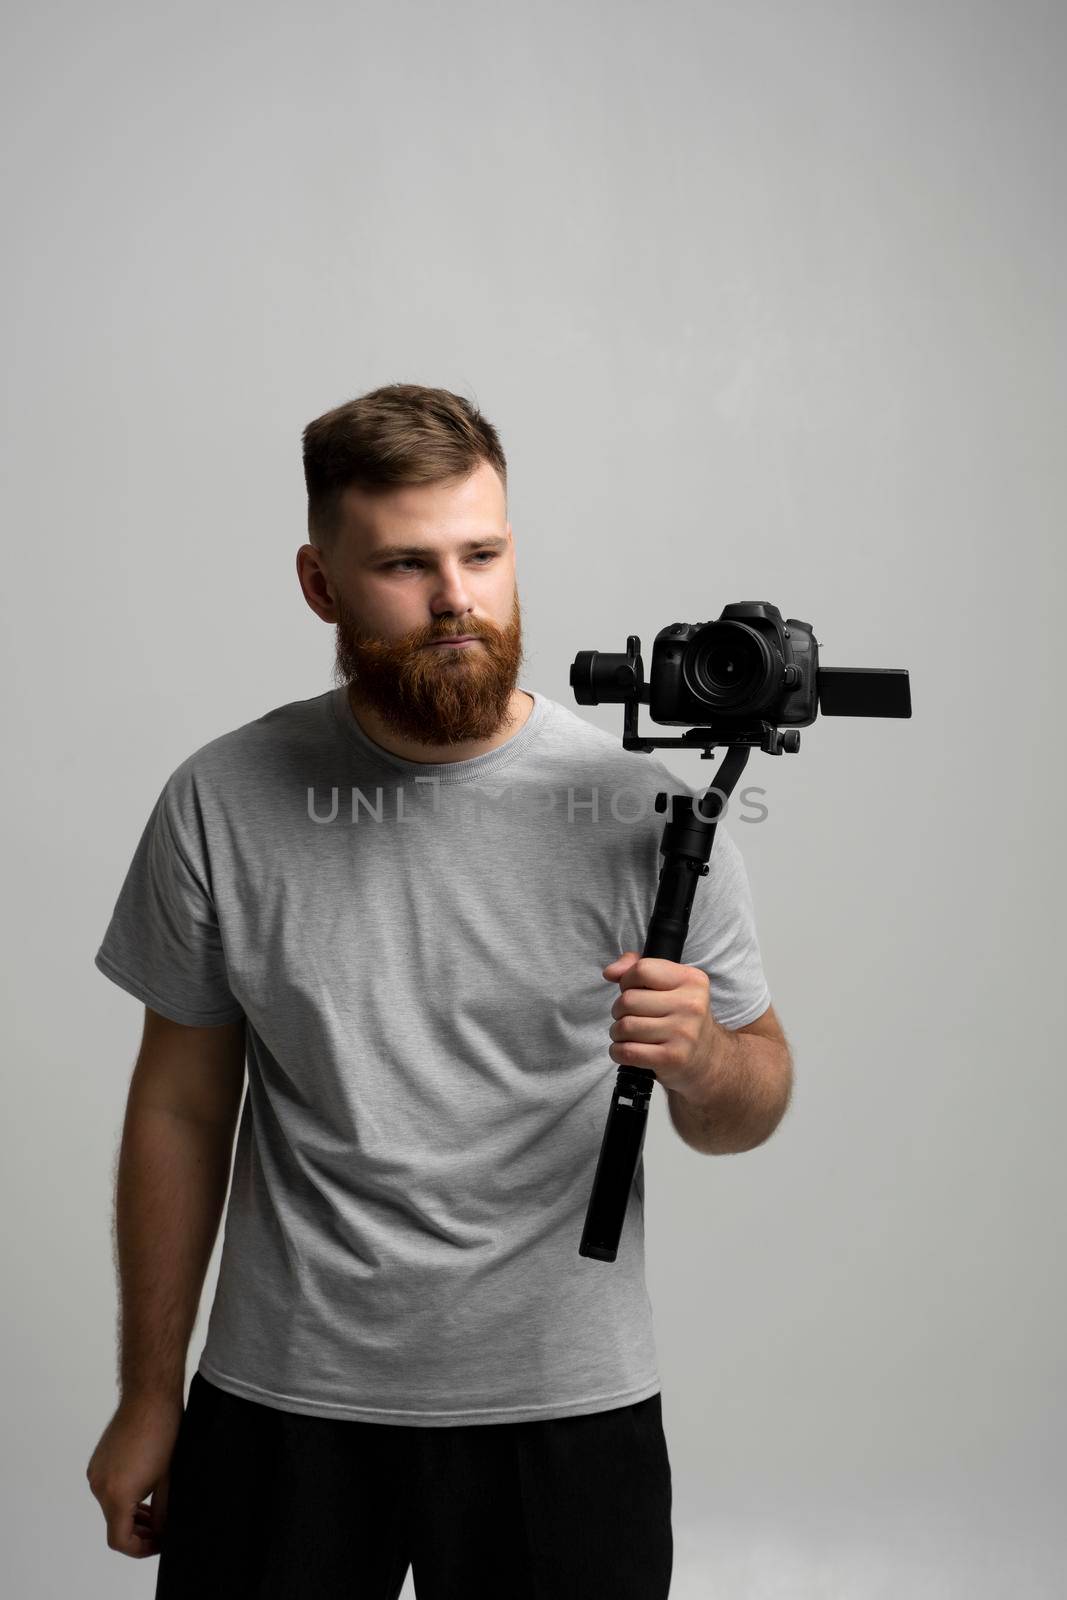 Proffesional videographer making a good footage using steadicam. Cameraman creator with a stabilizer in his hands takes a video on the slr video camera on white background. Creating a video content